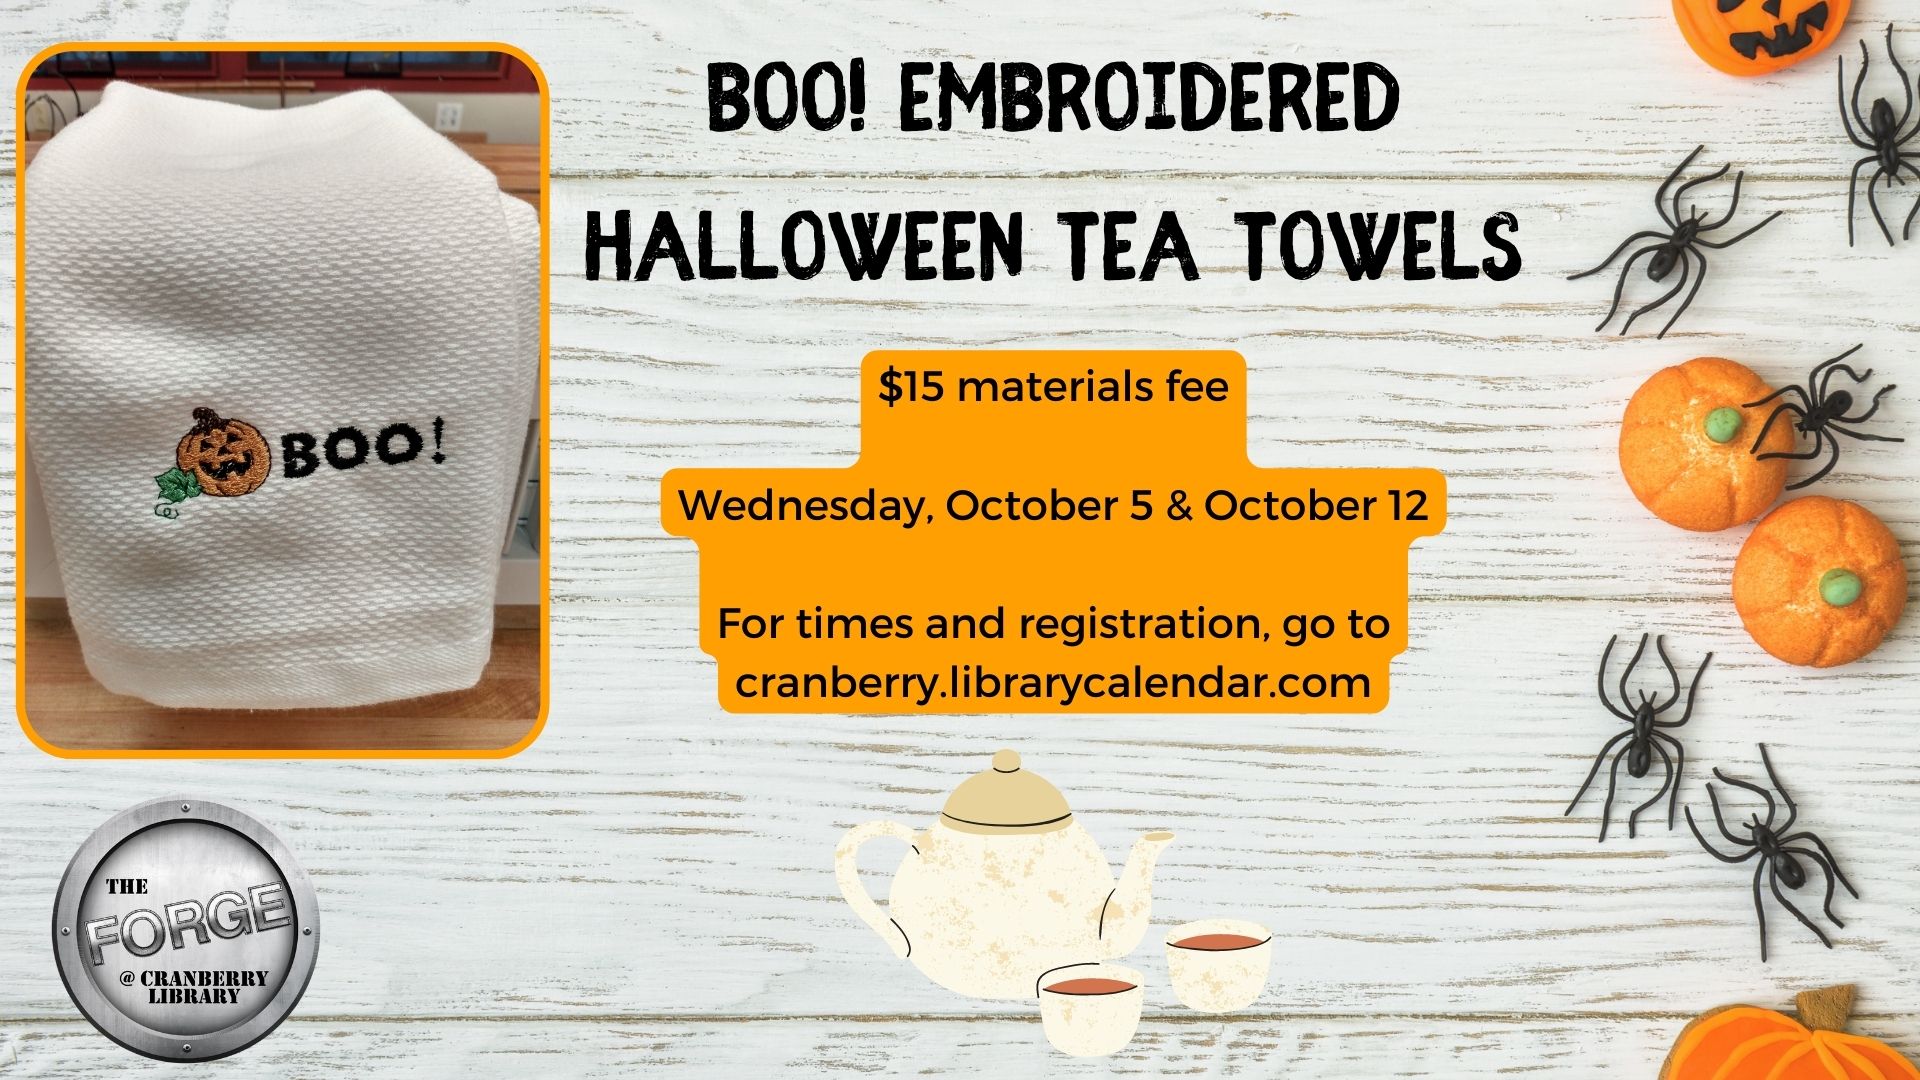 Flyer for Embroidered Halloween Tea Towels class in The Forge